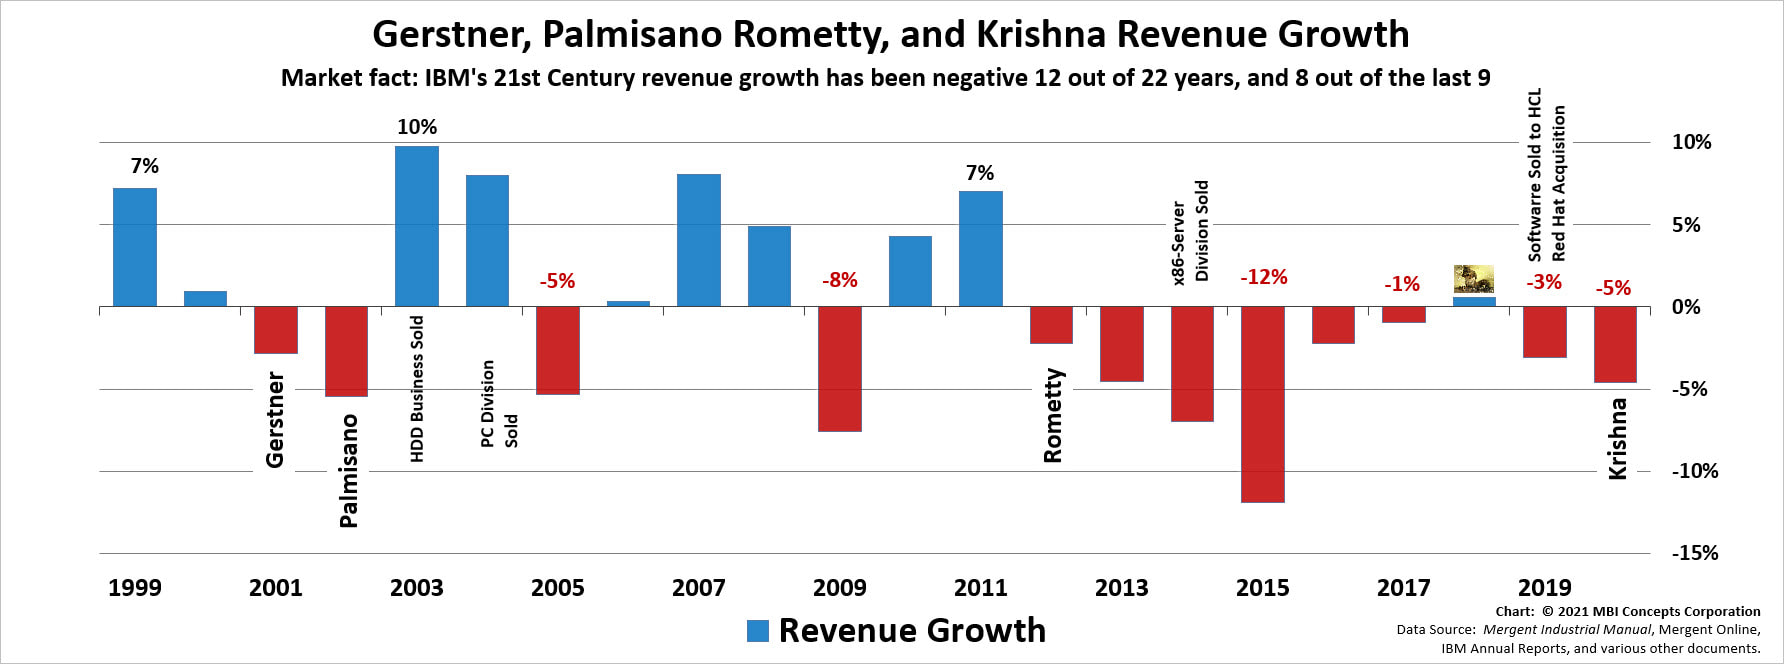 Bar chart showing the revenue (sales) growth performance of Virginia M. (Ginni) Rometty, Arvind Krishna, Samuel J. Palmisano and Louis V. Gerstner from 2000 through 2020.